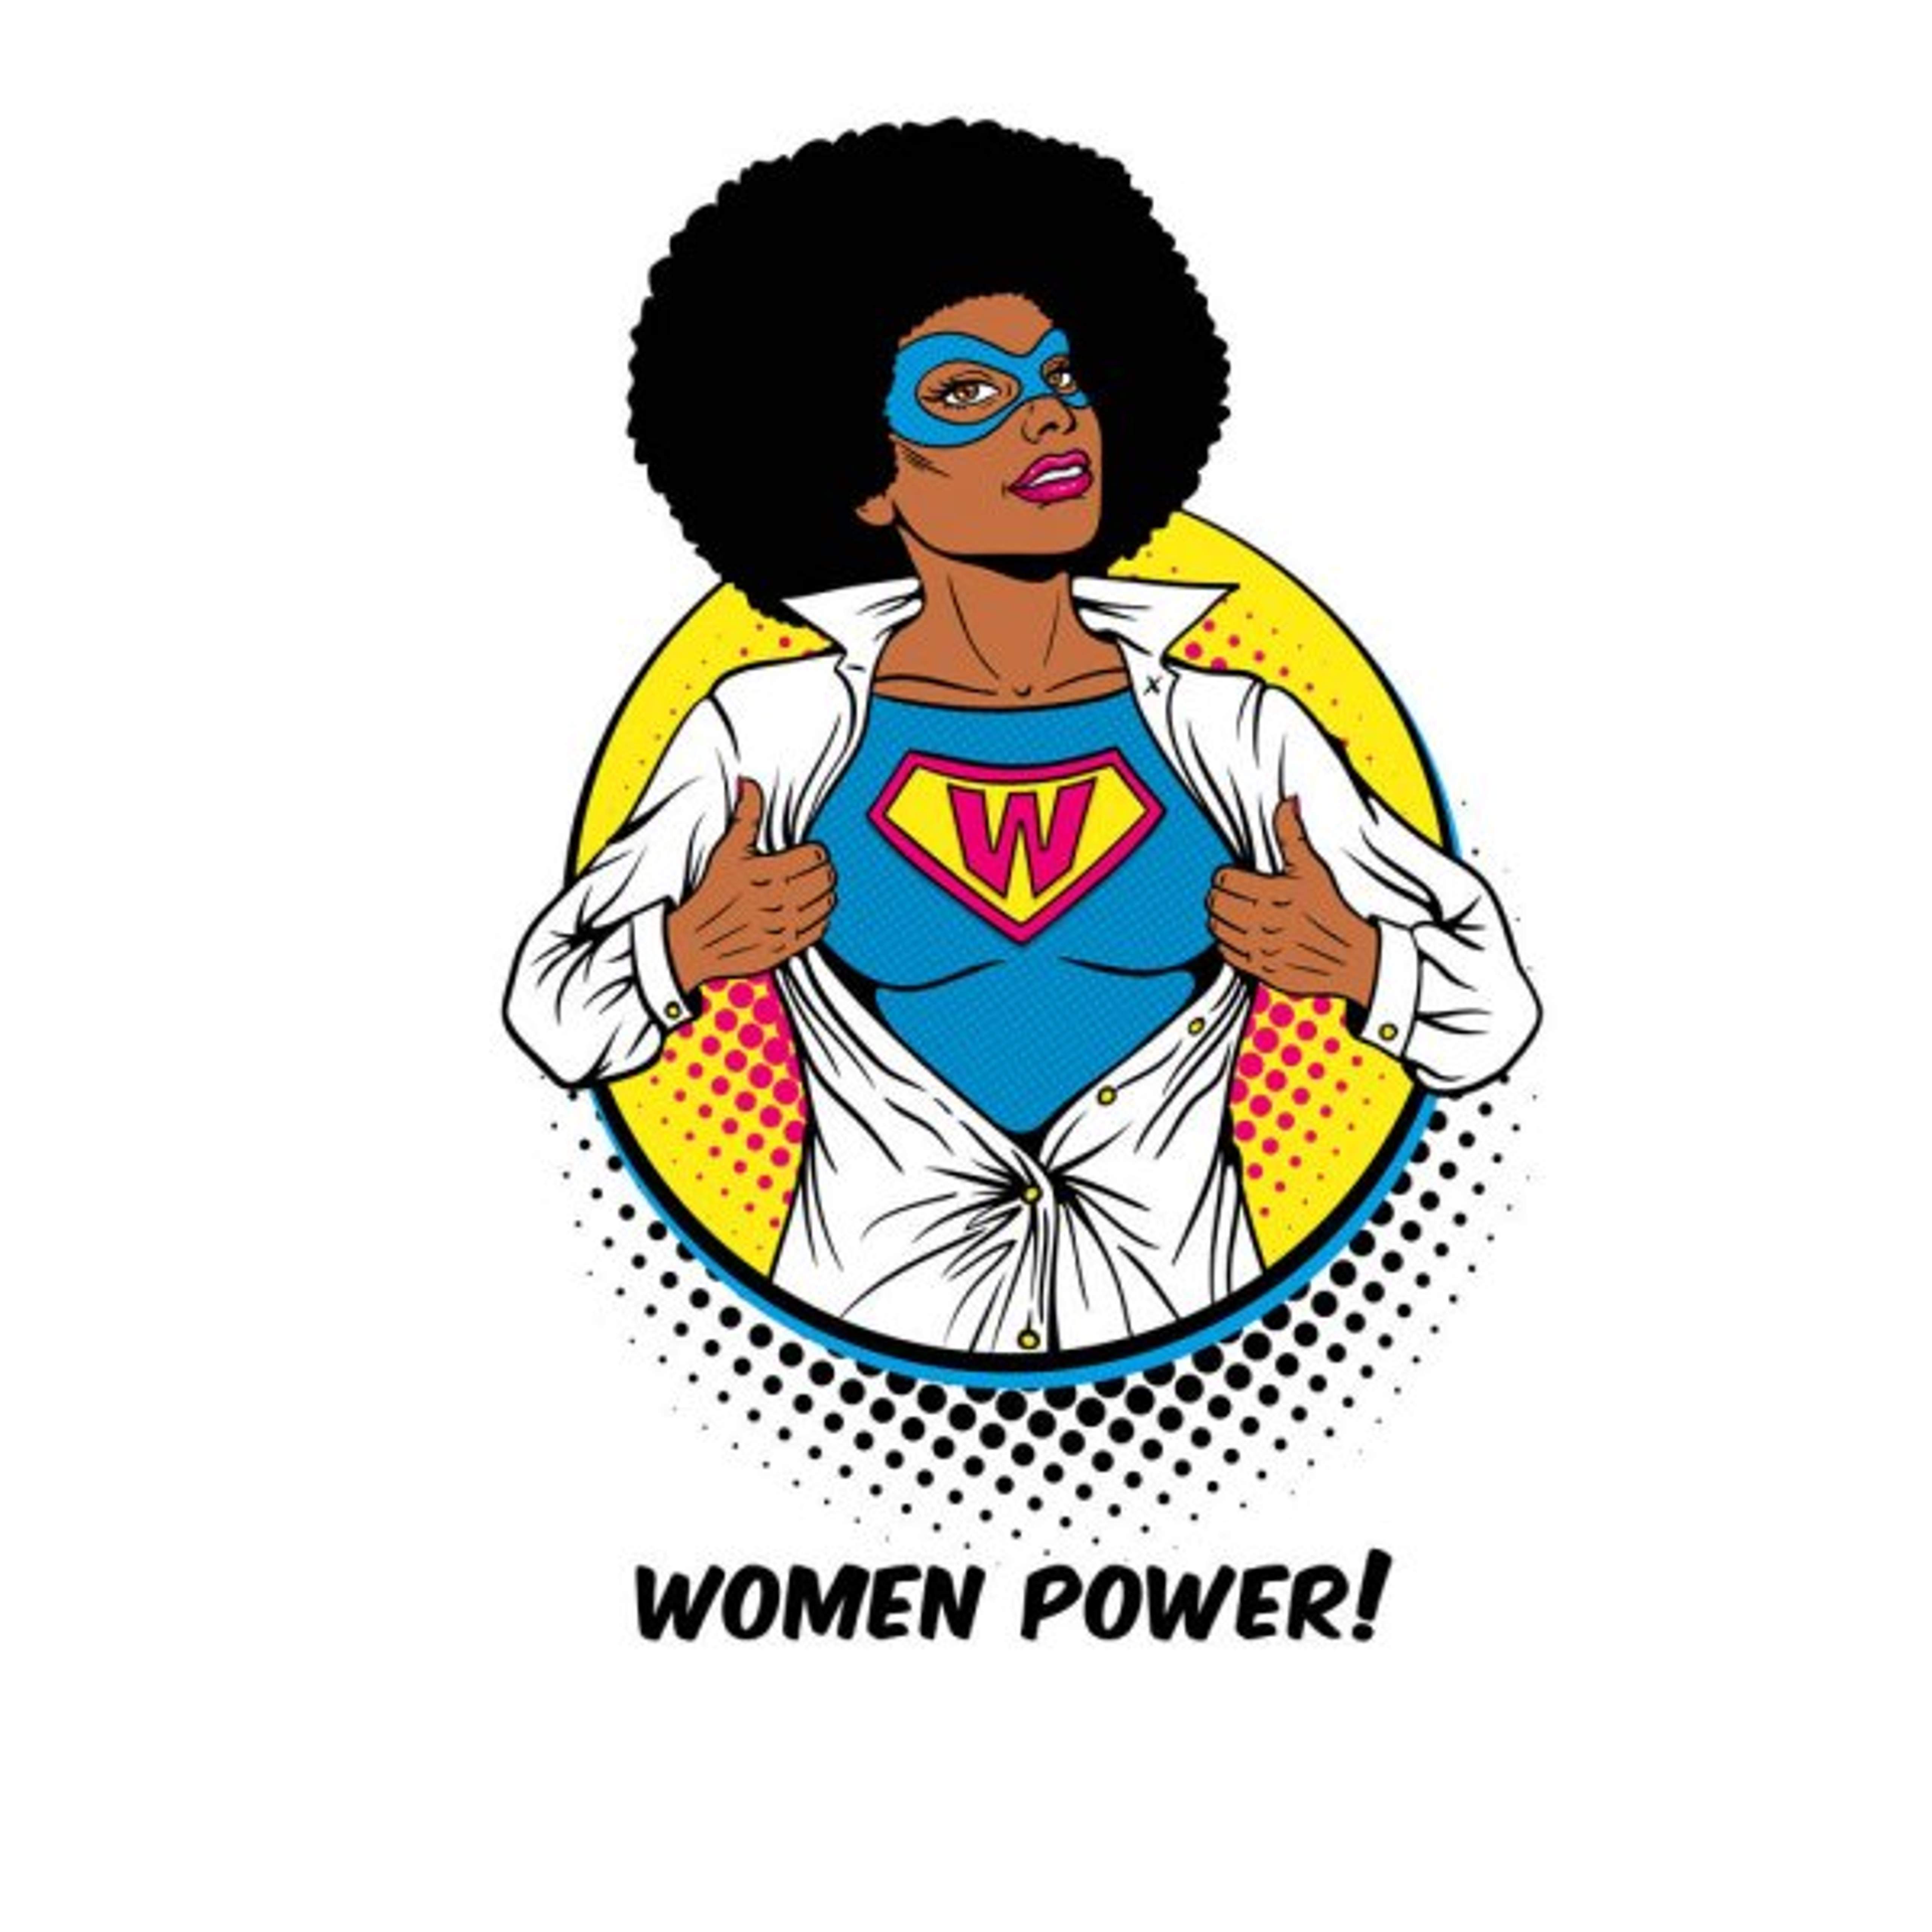 Africa-American women with "Woman Power" shirt.